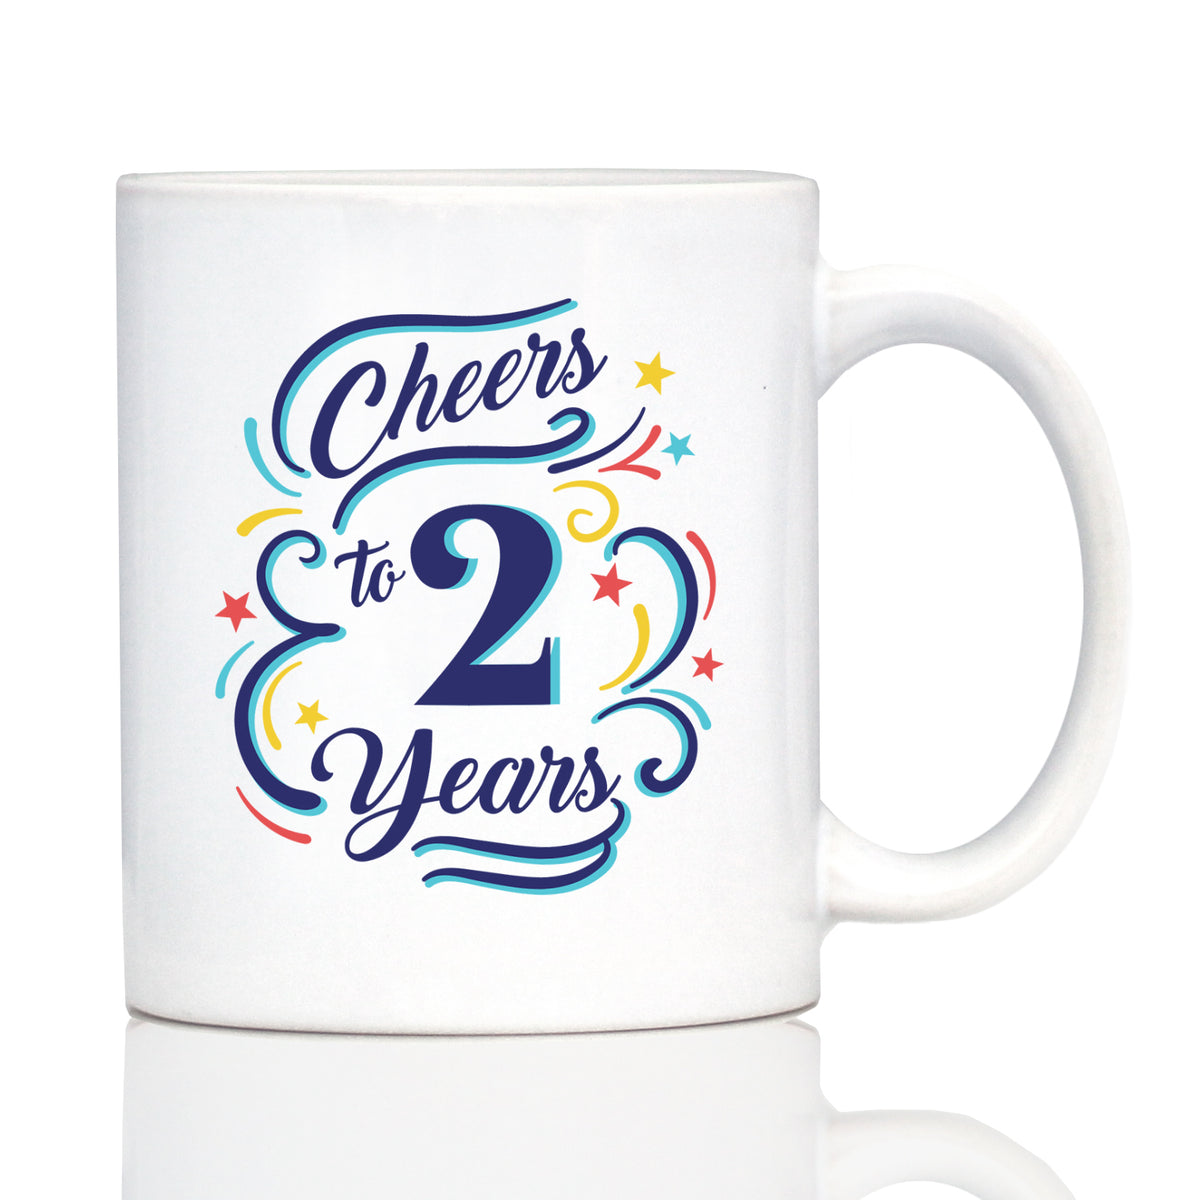 Cheers to 2 Years - Coffee Mug Gifts for Women &amp; Men - 2nd Anniversary Party Decor